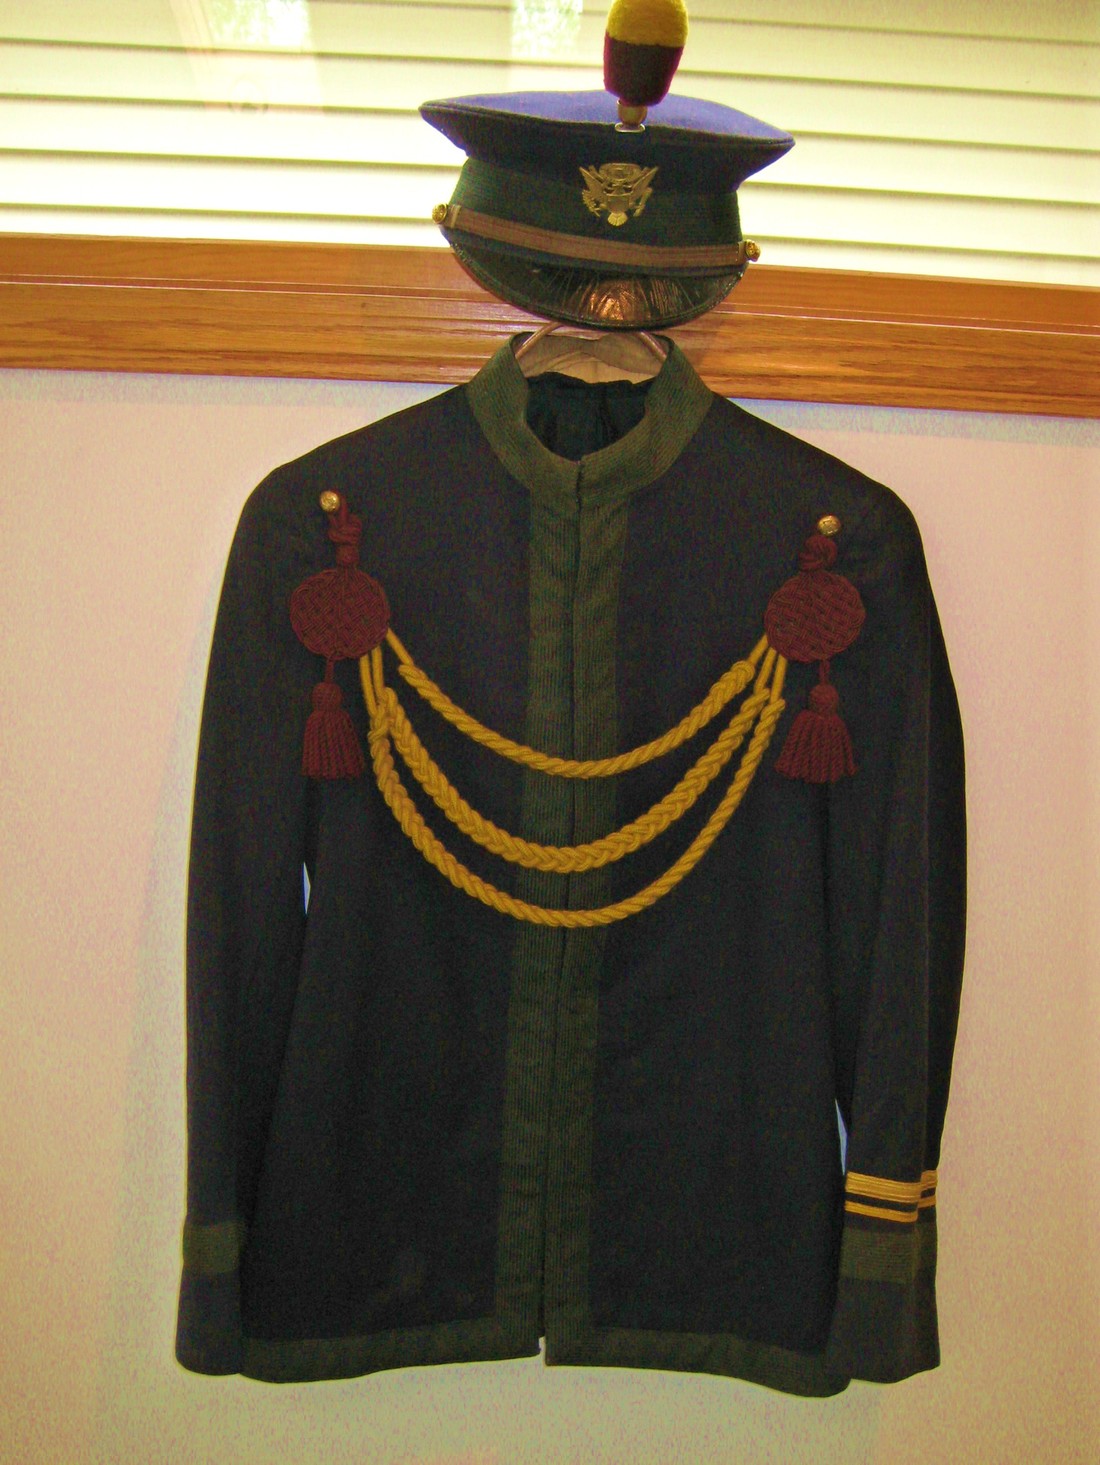 Band uniform from 1920s